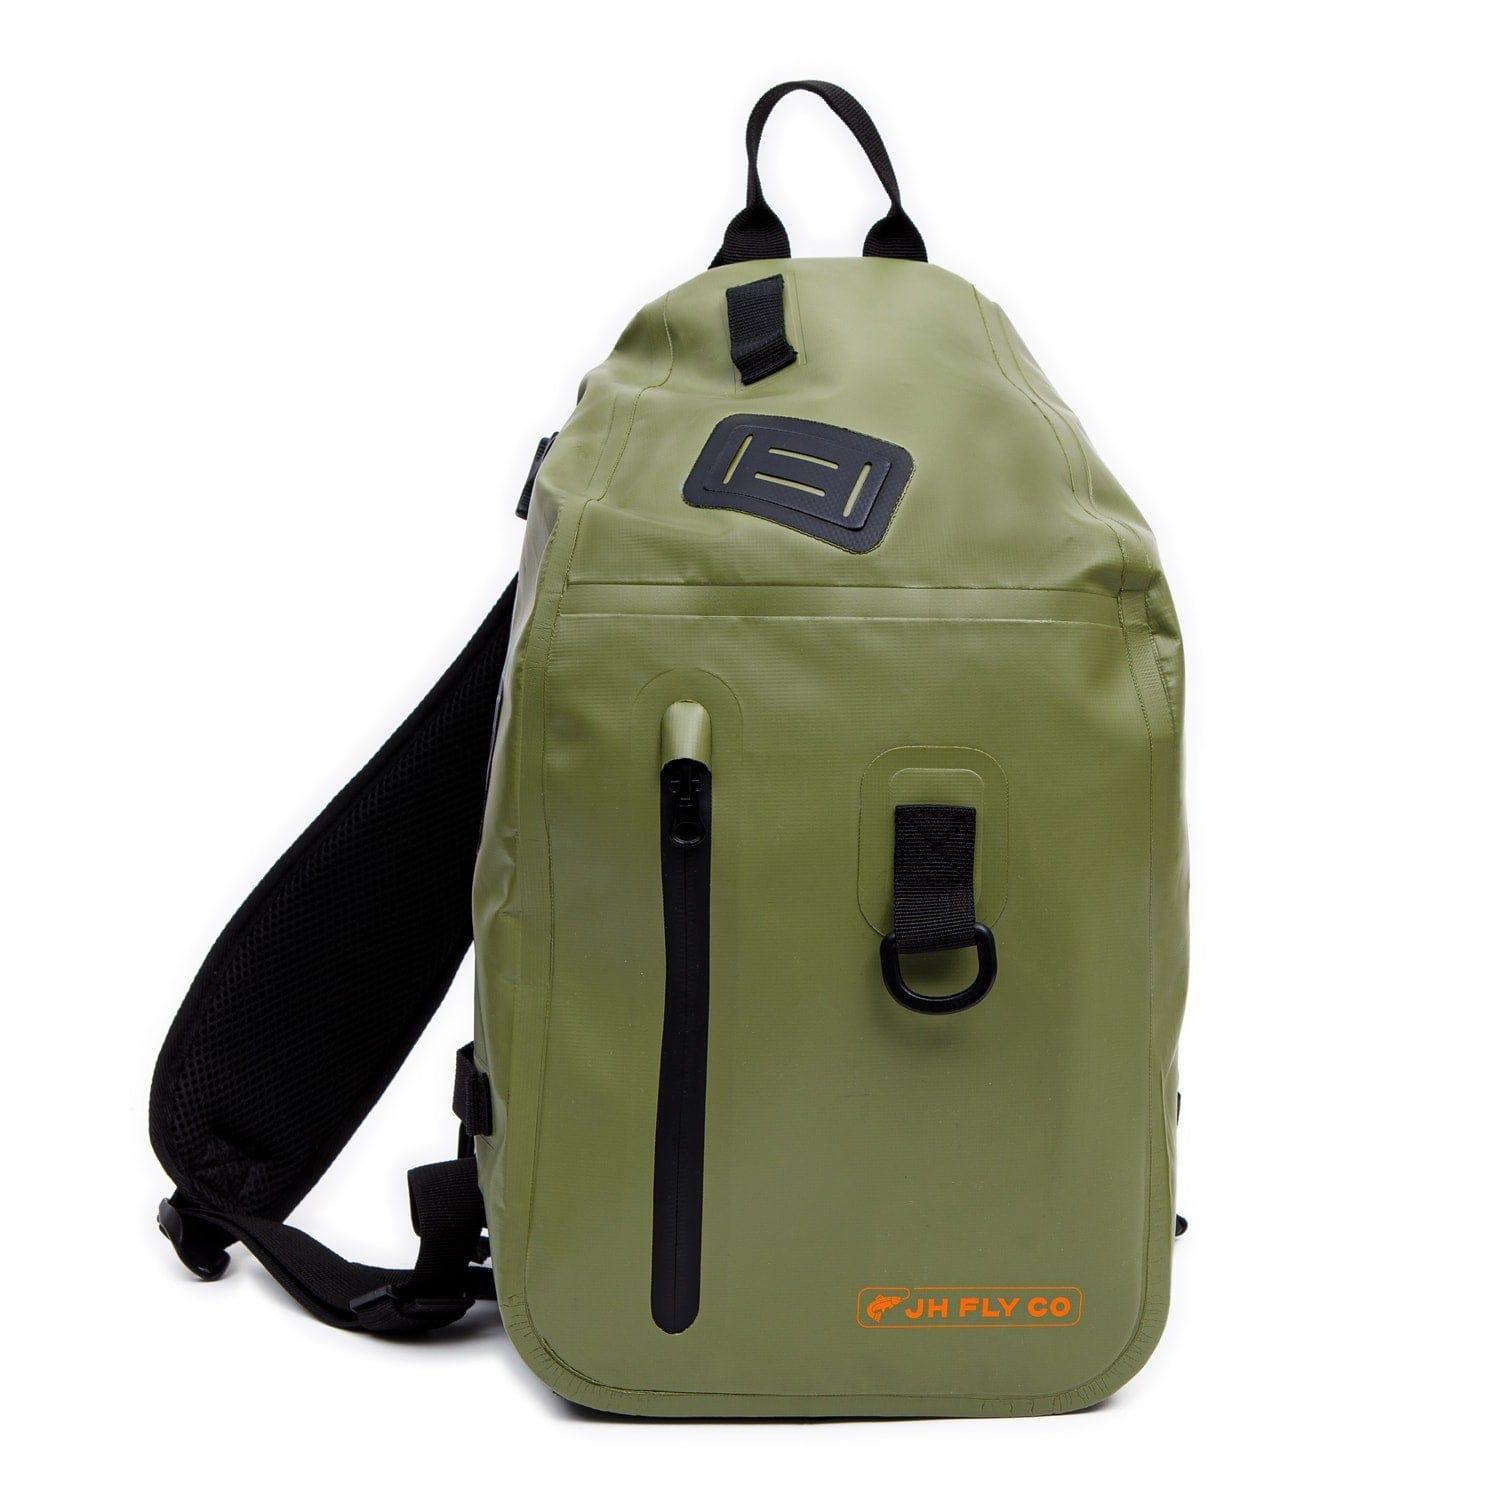 DON'T Want To Spend $$$ On A SLING PACK? Check This Out. 